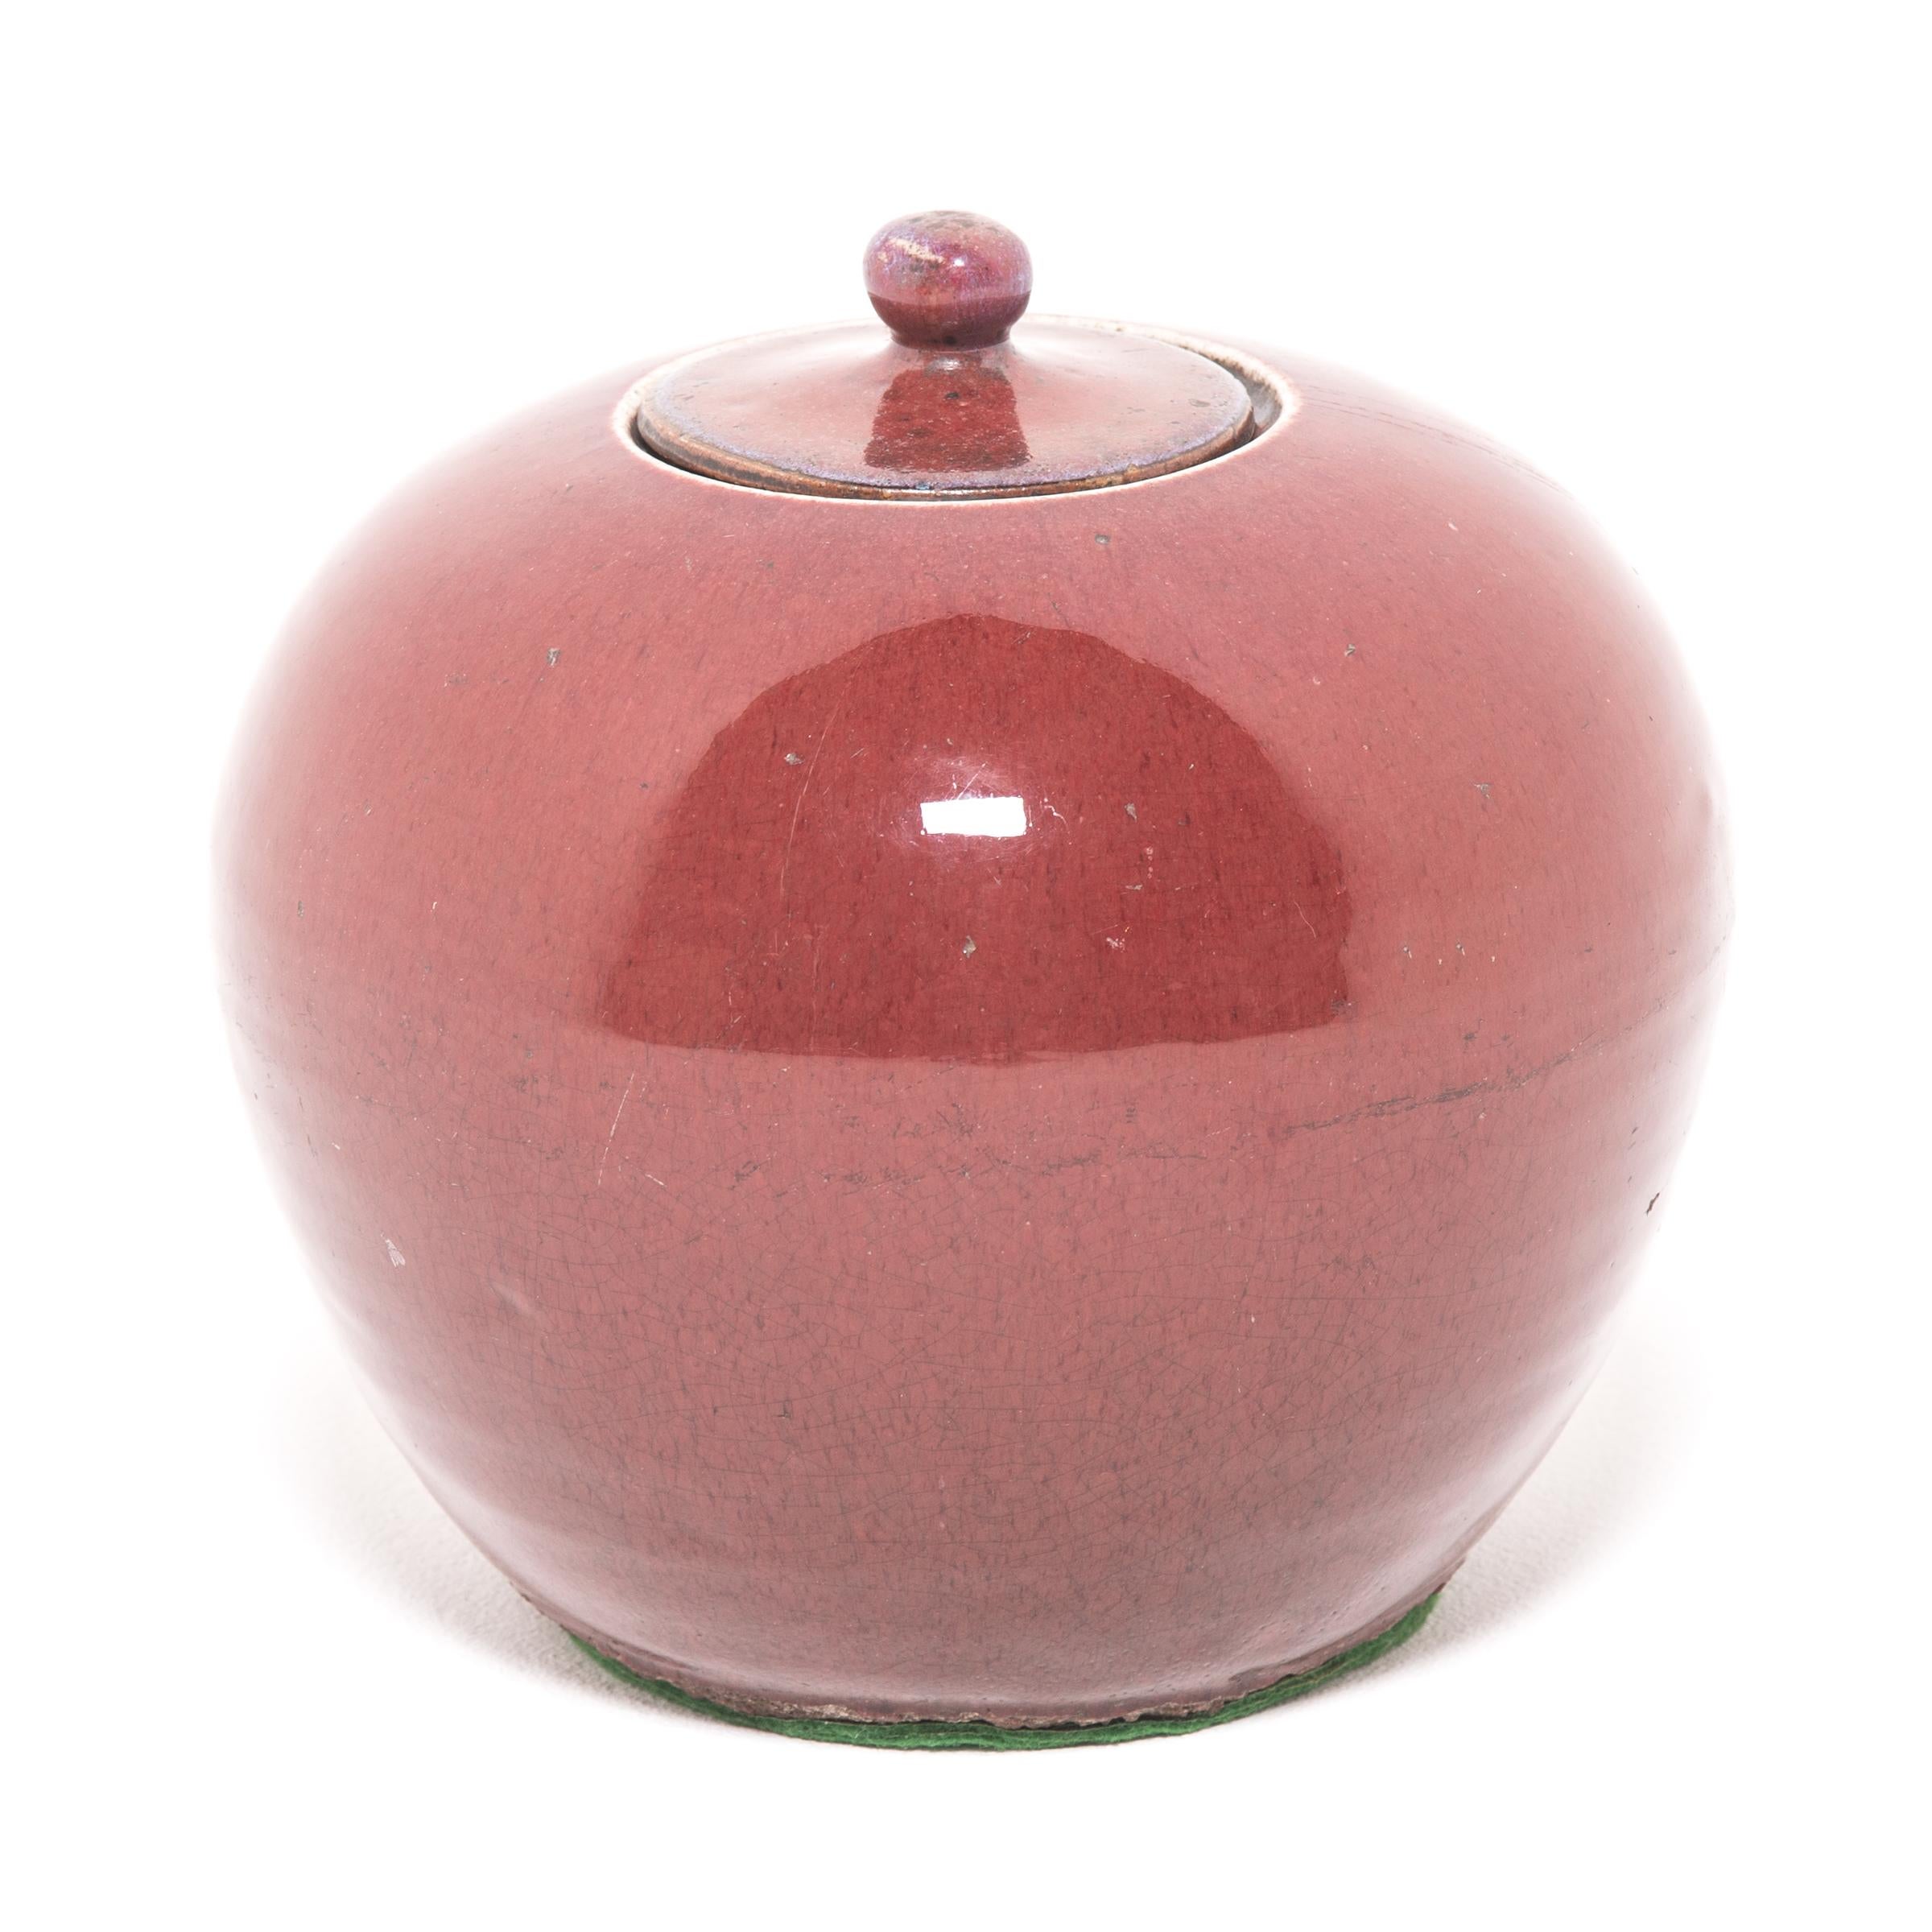 With its Classic form, this round melon jar is the perfect canvas for its rich, peach blossom glaze. For many Qing-dynasty elite, peach blossom was a preferred finish to fine ceramics for its resemblance to sweet, ripened fruit. The copper-based